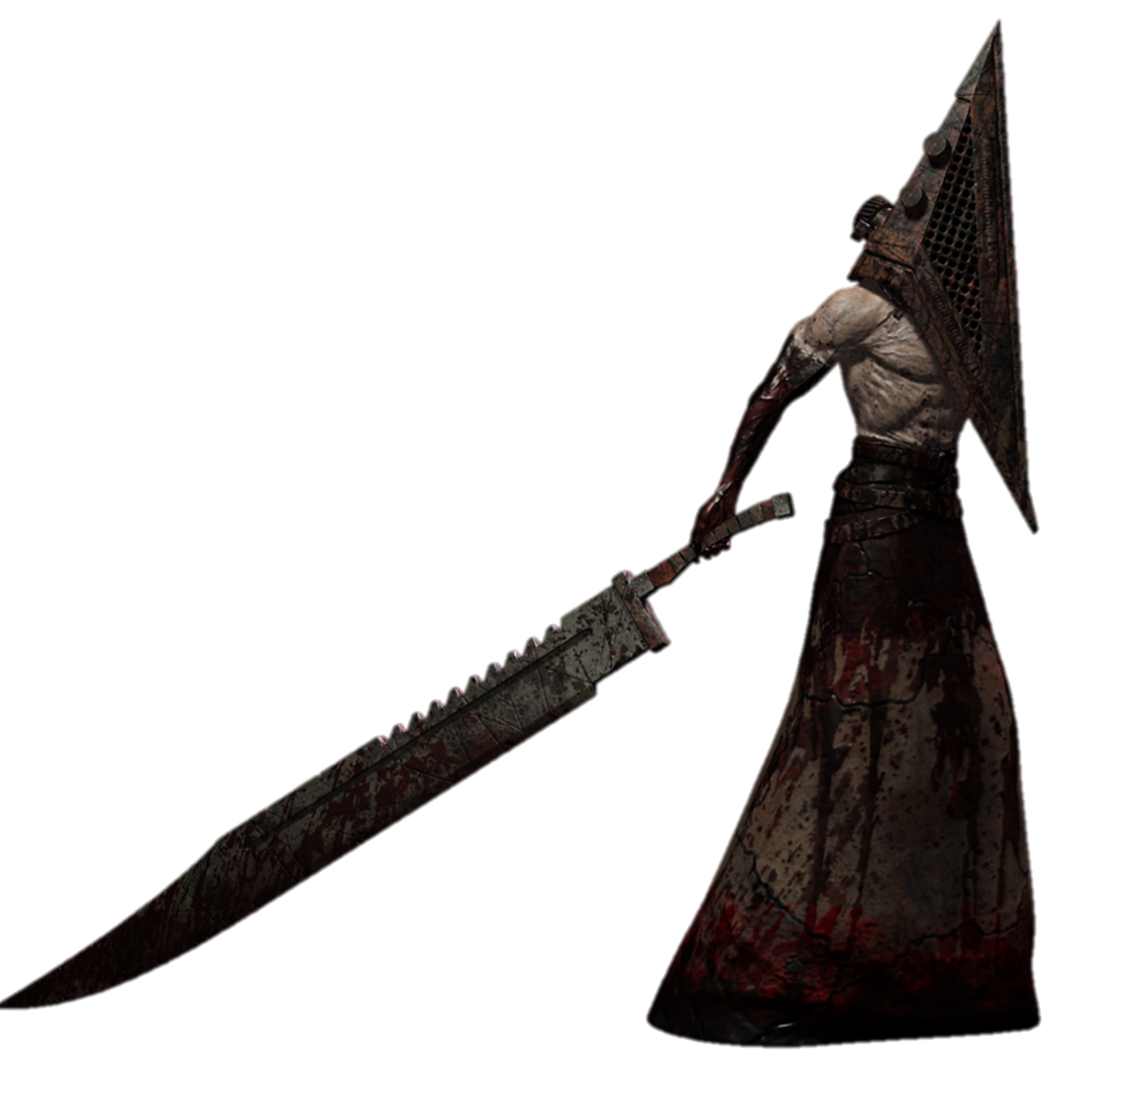 Pyramid head Sword from Silent hill, completed prop commiss…